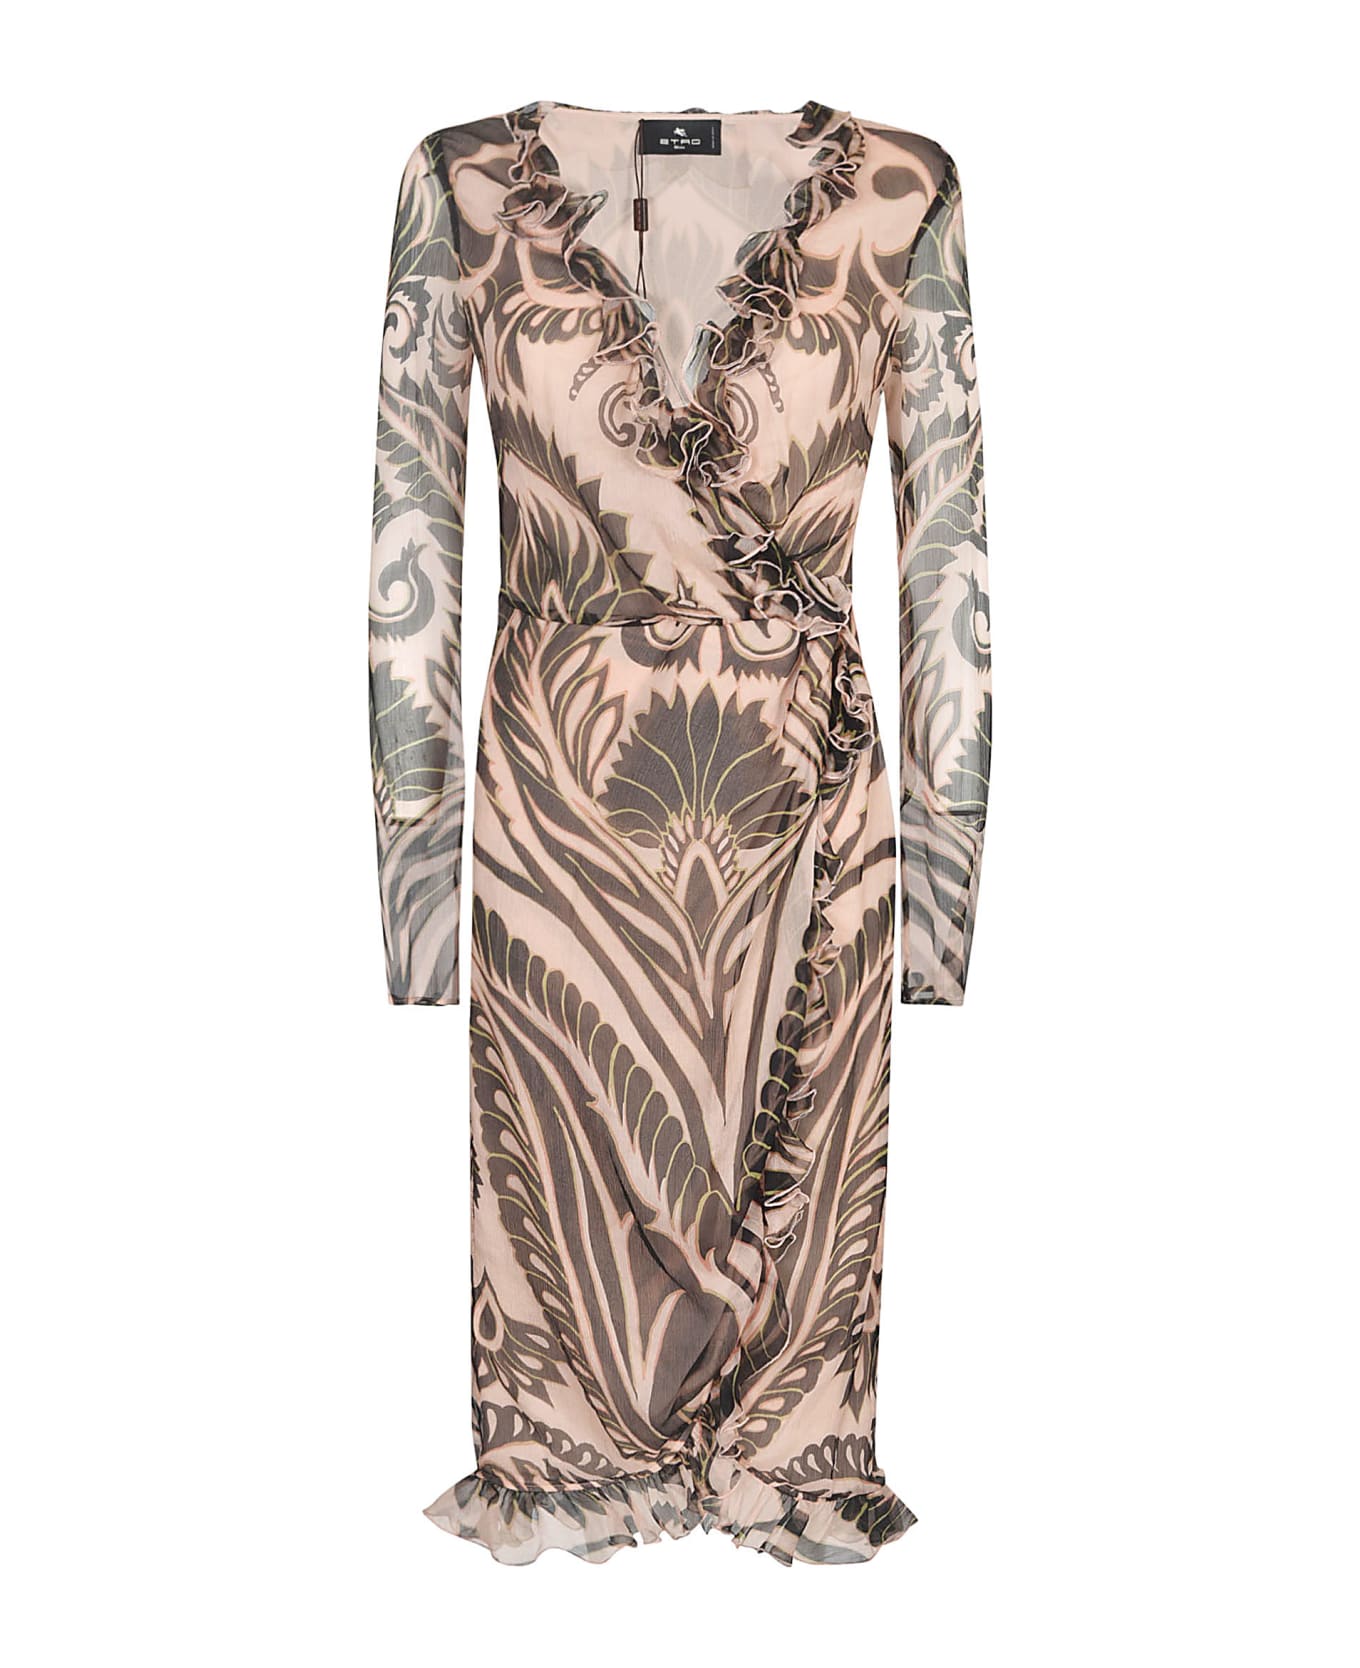 Etro Ruffle Trimmed All-over Printed Dress - .